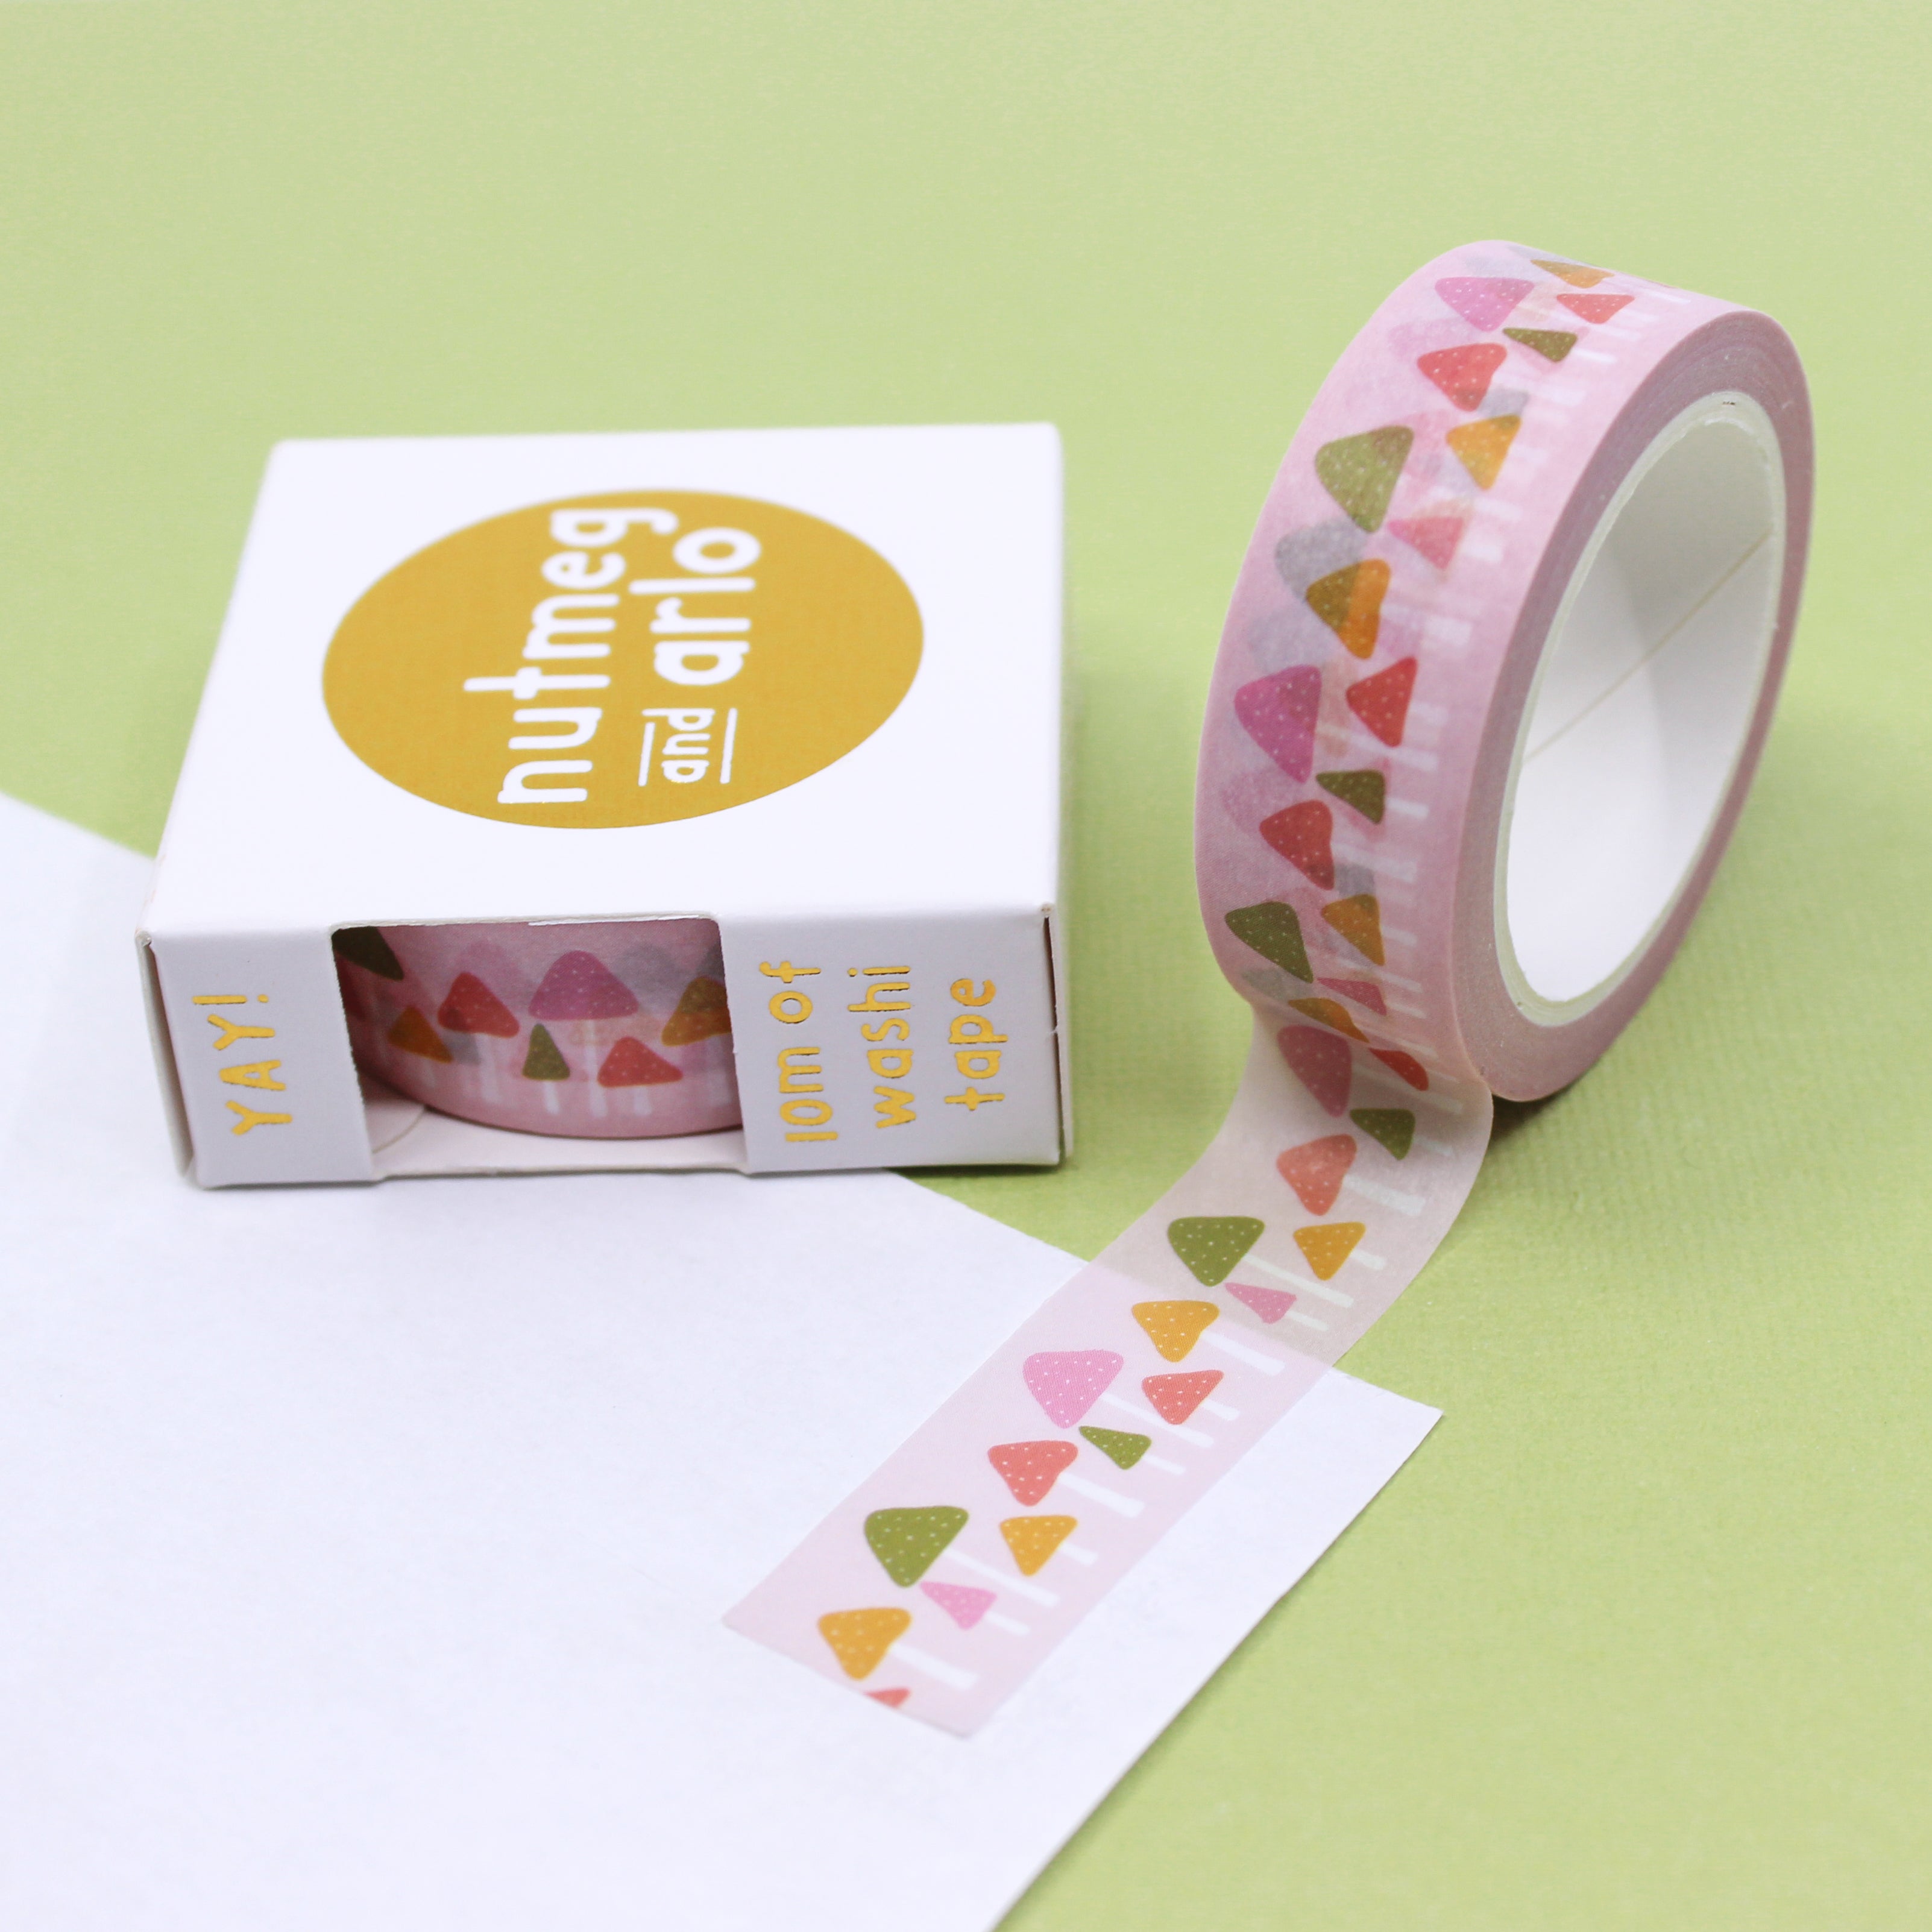 This is a photo of a cute pastel toadstool mushroom washi tape with sweet candy colors from BBB Supplies Craft Shop.